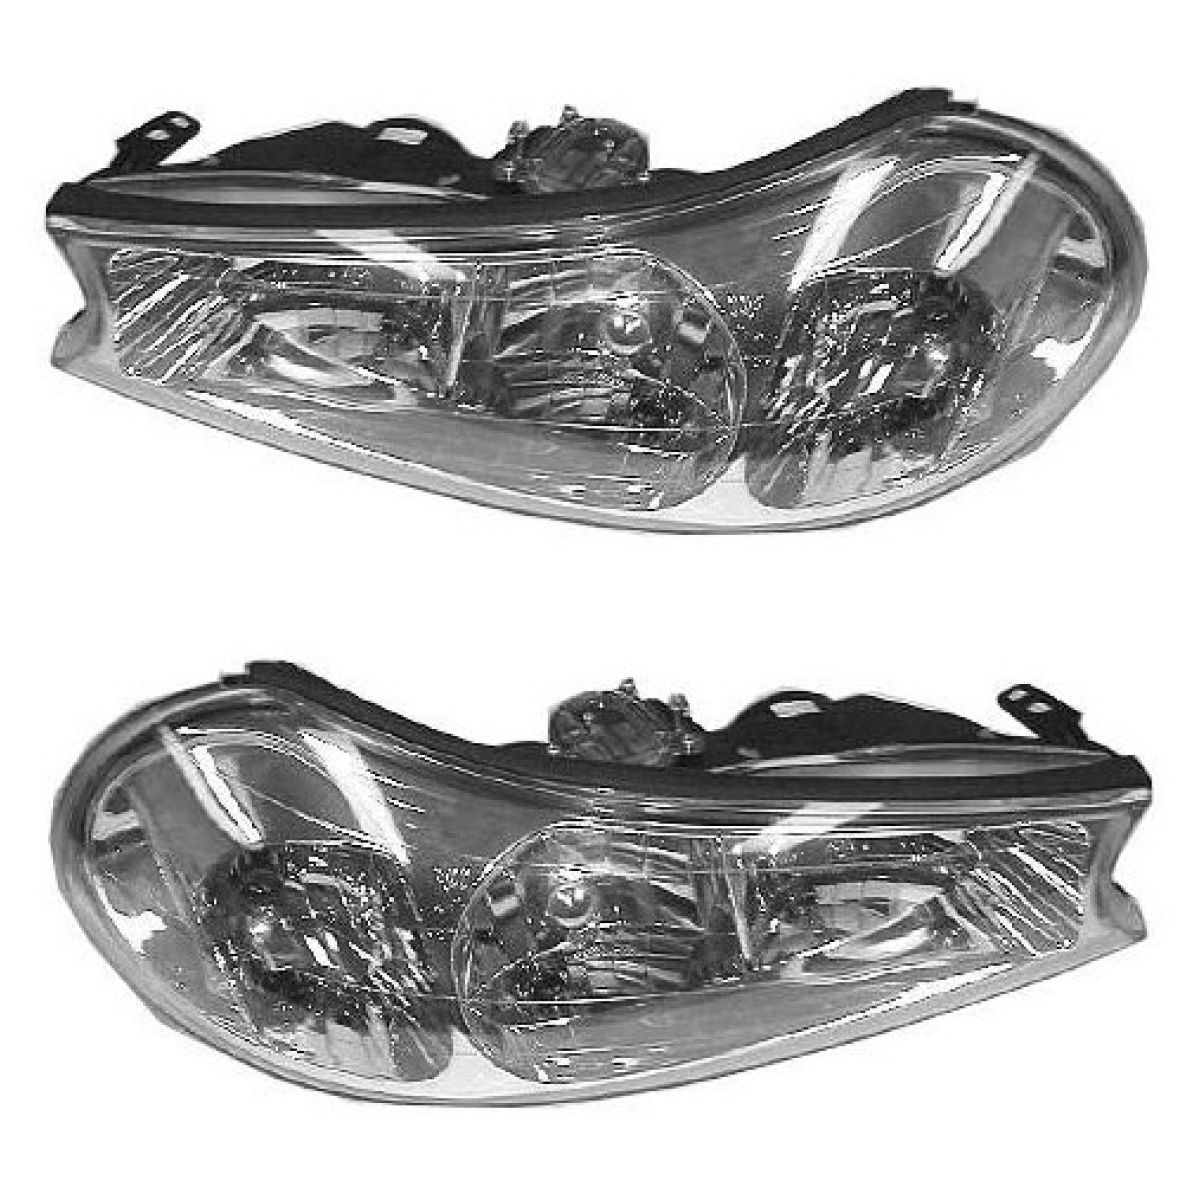 99 Ford contour headlights